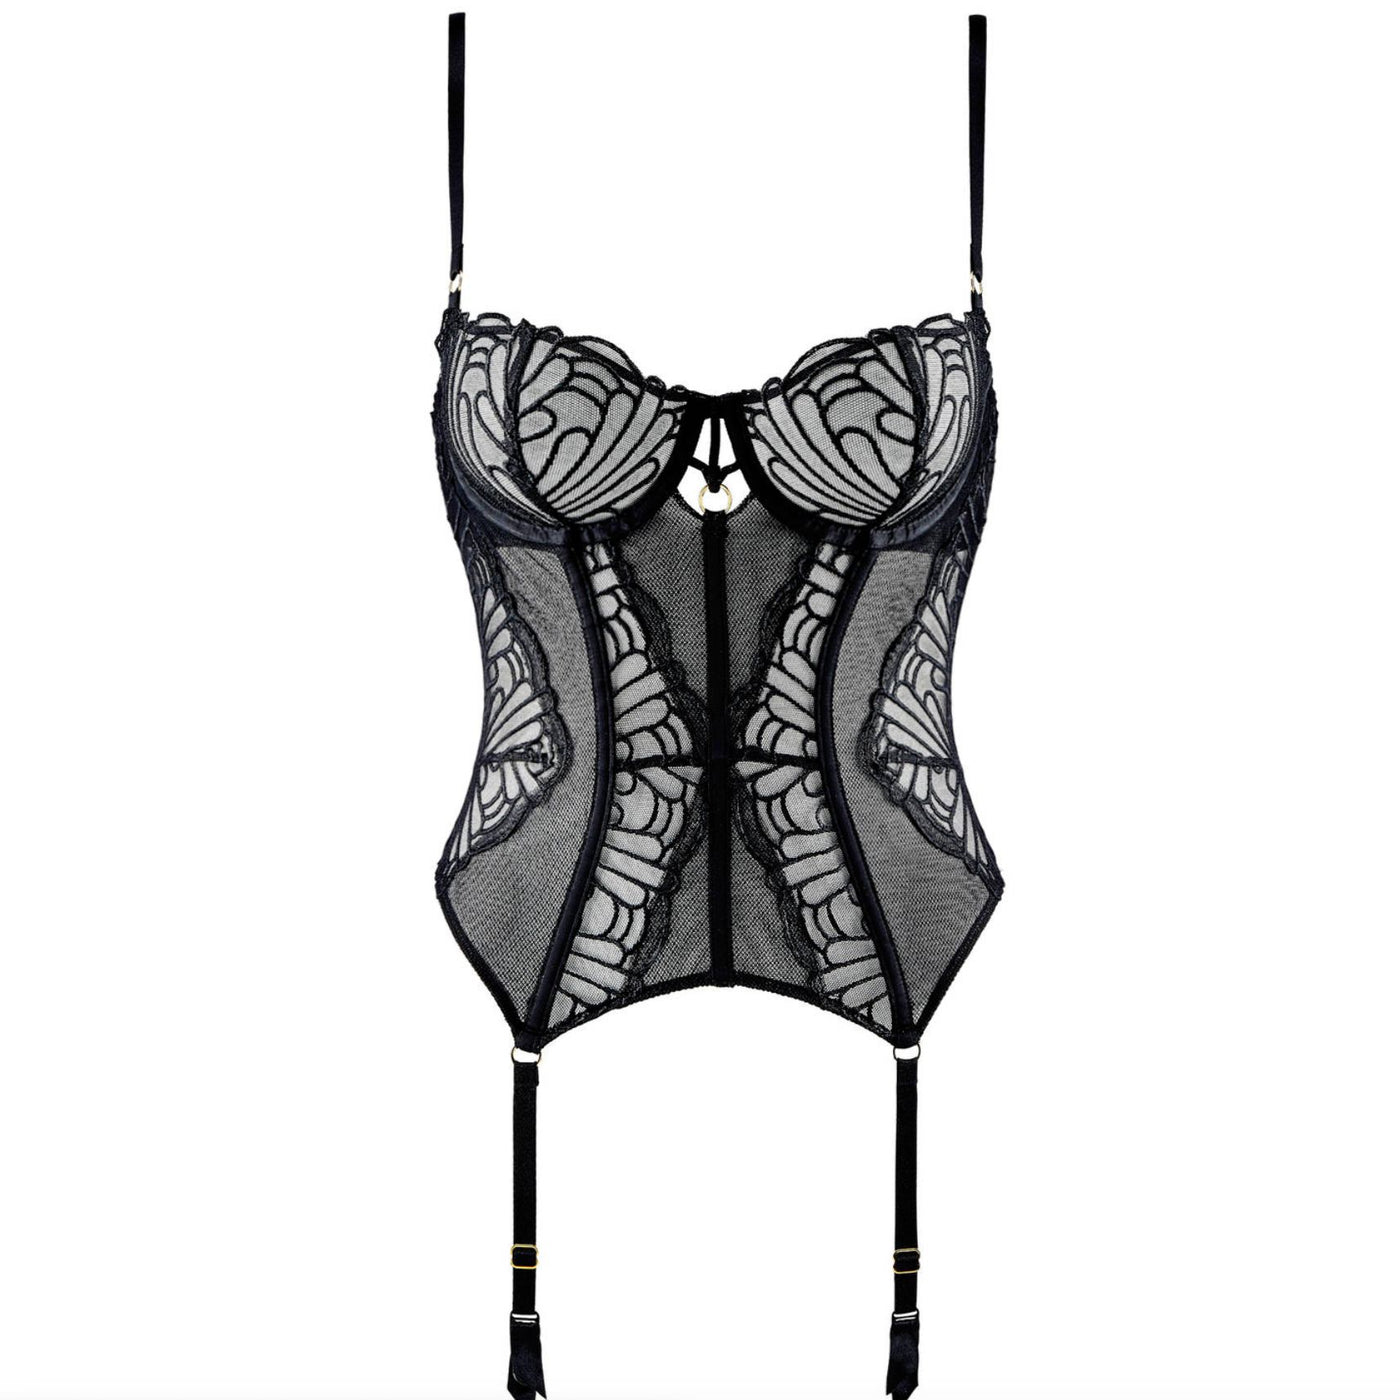 Aubade L'Indomptable Guepiere 1I92 in After Dark-Corsets / Bustiers-Aubade-After Dark-32-B-Anna Bella Fine Lingerie, Reveal Your Most Gorgeous Self!